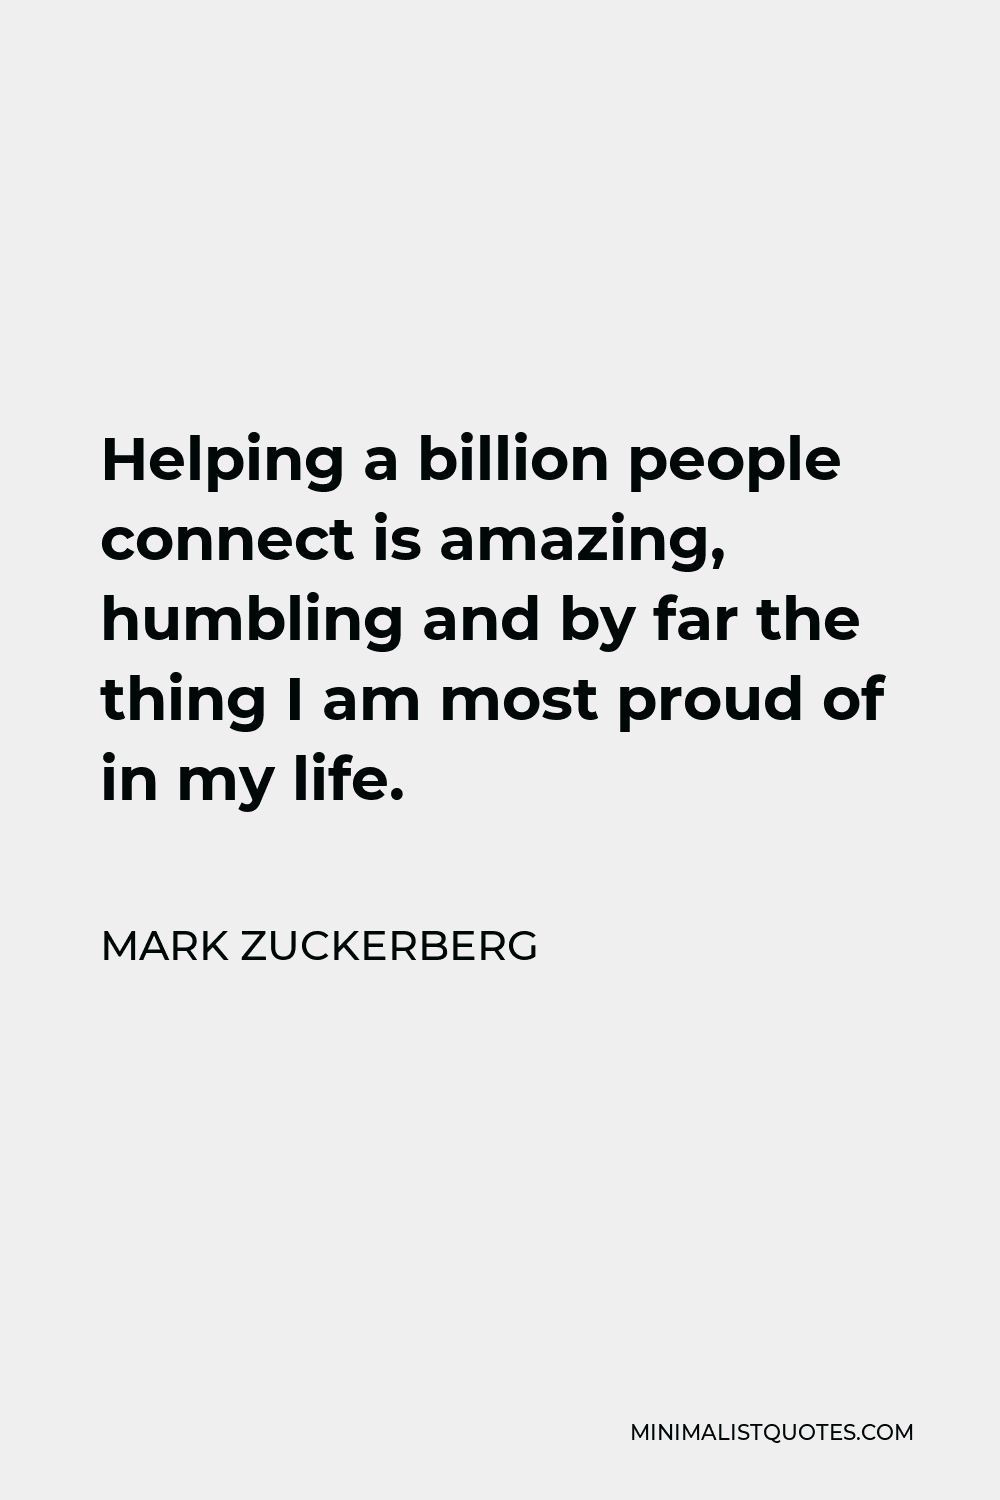 Mark Zuckerberg Quote - Helping a billion people connect is amazing, humbling and by far the thing I am most proud of in my life.